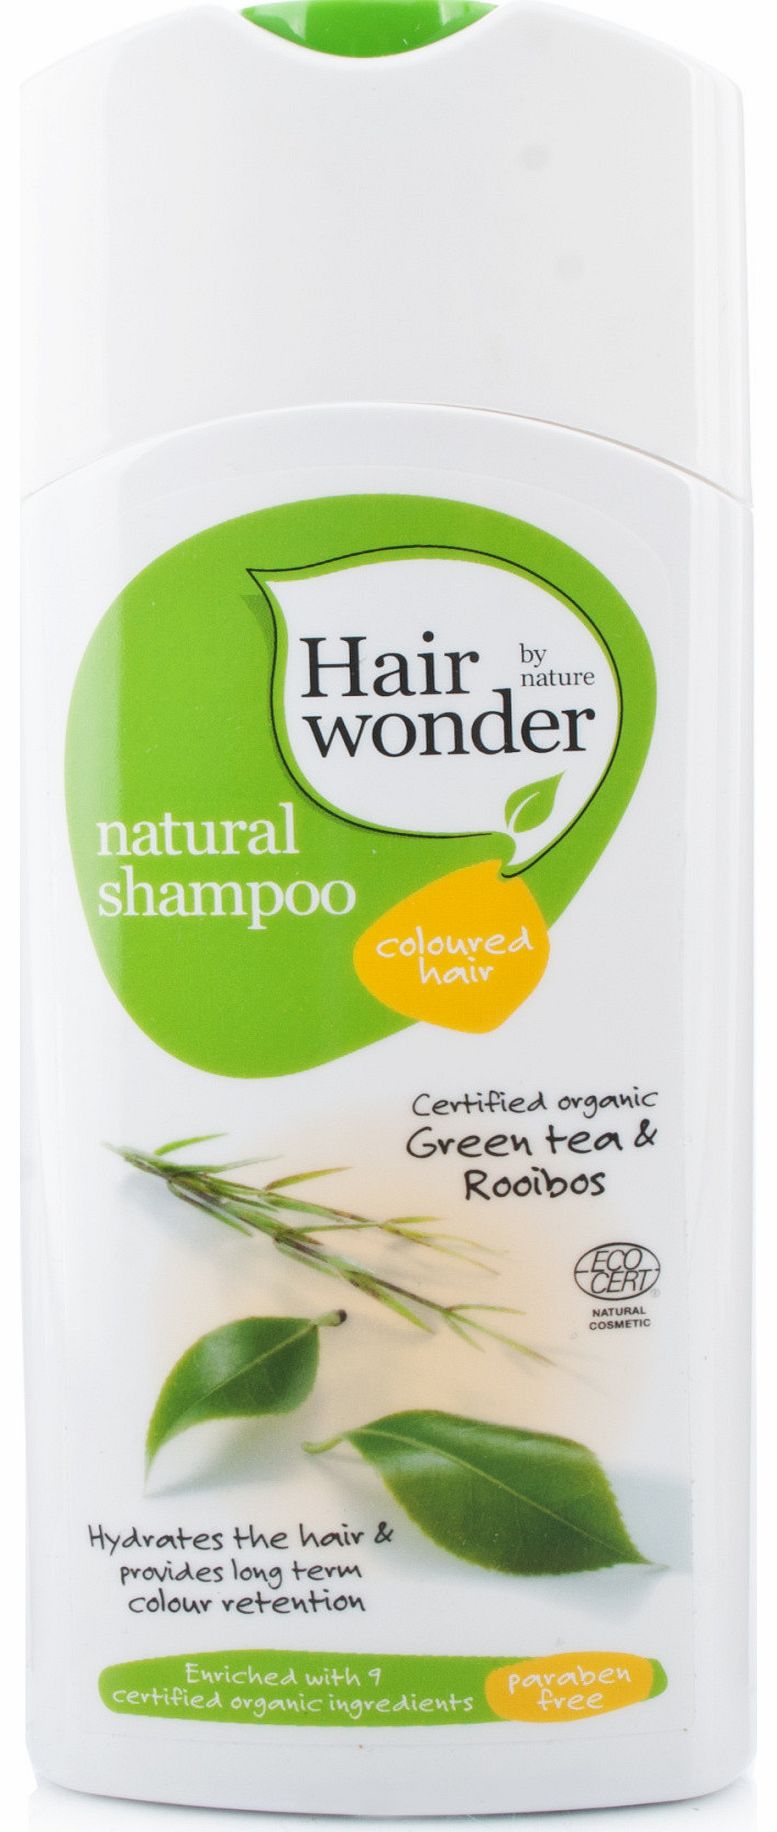 Hair Wonder Natural Shampoo Coloured Hair is 100% Ecocert certified, free of Lauryl and Laureth Sulphates, enriched with up to 13 certified organic ingredients, biodegradable, free of animal ingredients and Parabens so gentle for hair and skin. This 